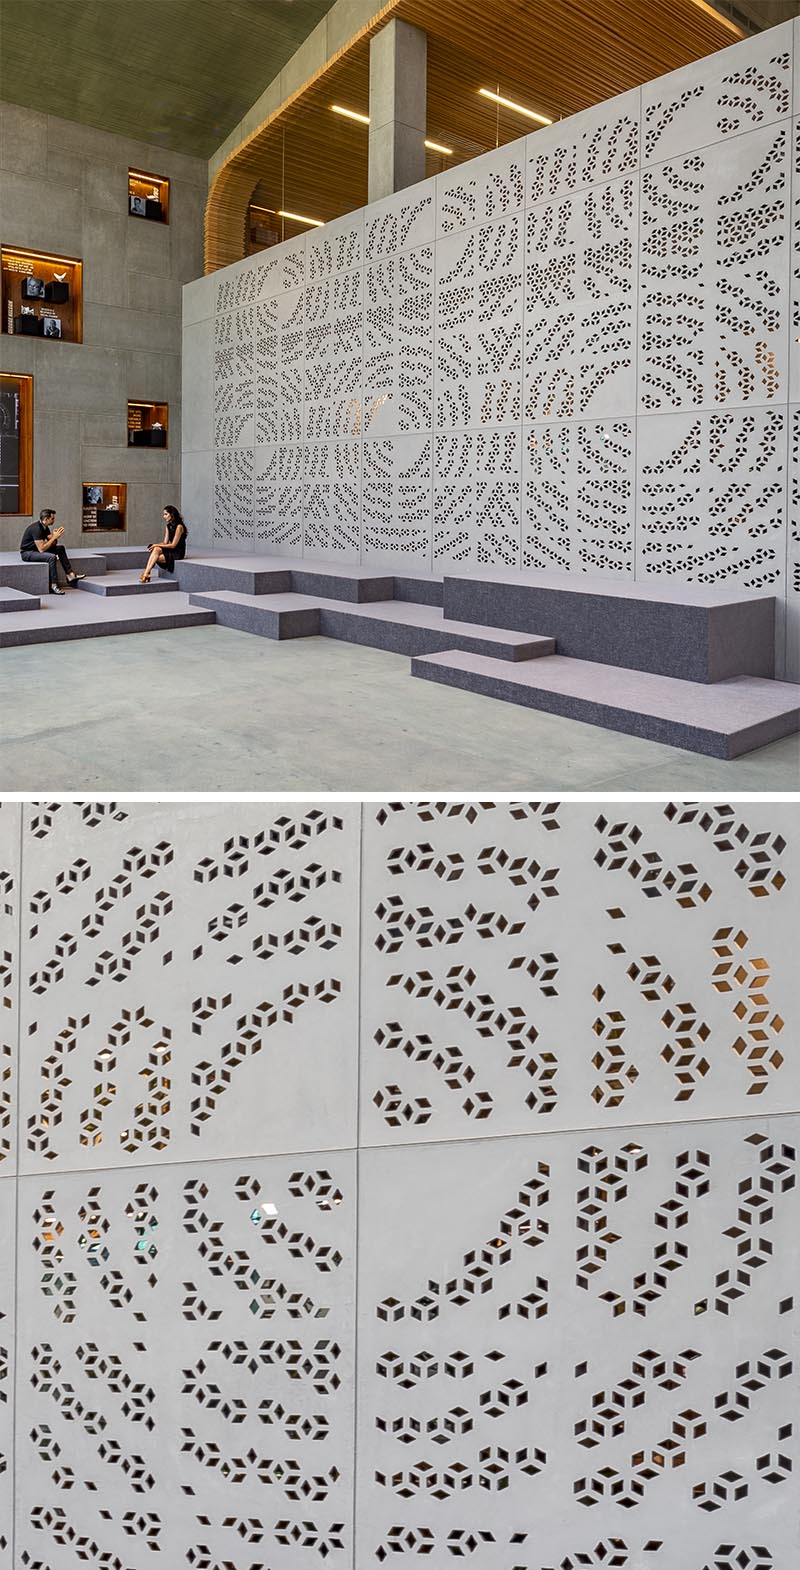 The large wall, located in an expansive reception space, has been adorned with geometric perforations creating an overall circular pattern. #OfficeDesign #WorkplaceDesign #ArtisticWall #Perforated Wall